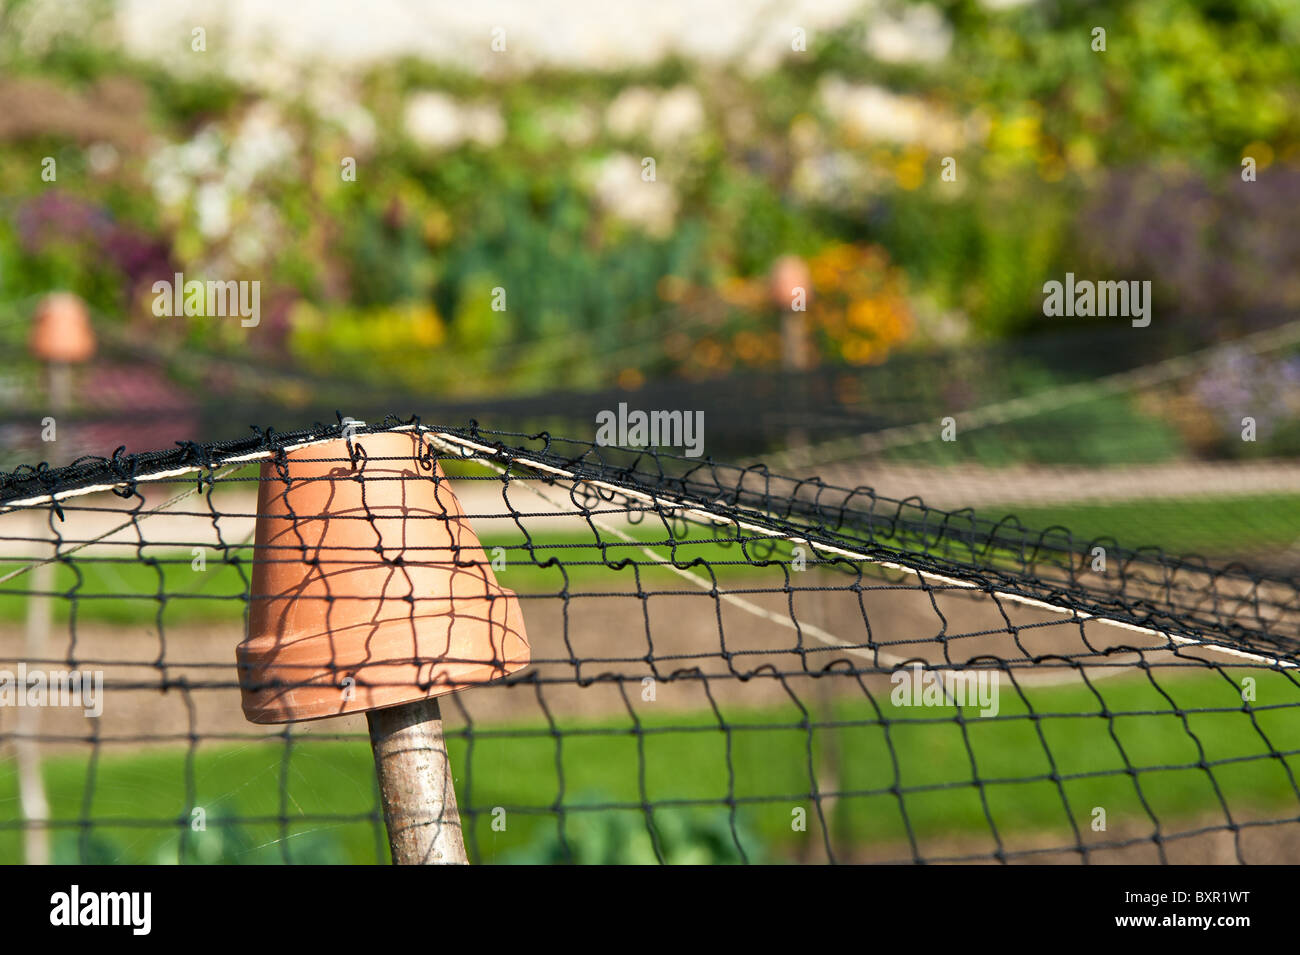 Netting protecting an allotment from birds Stock Photo